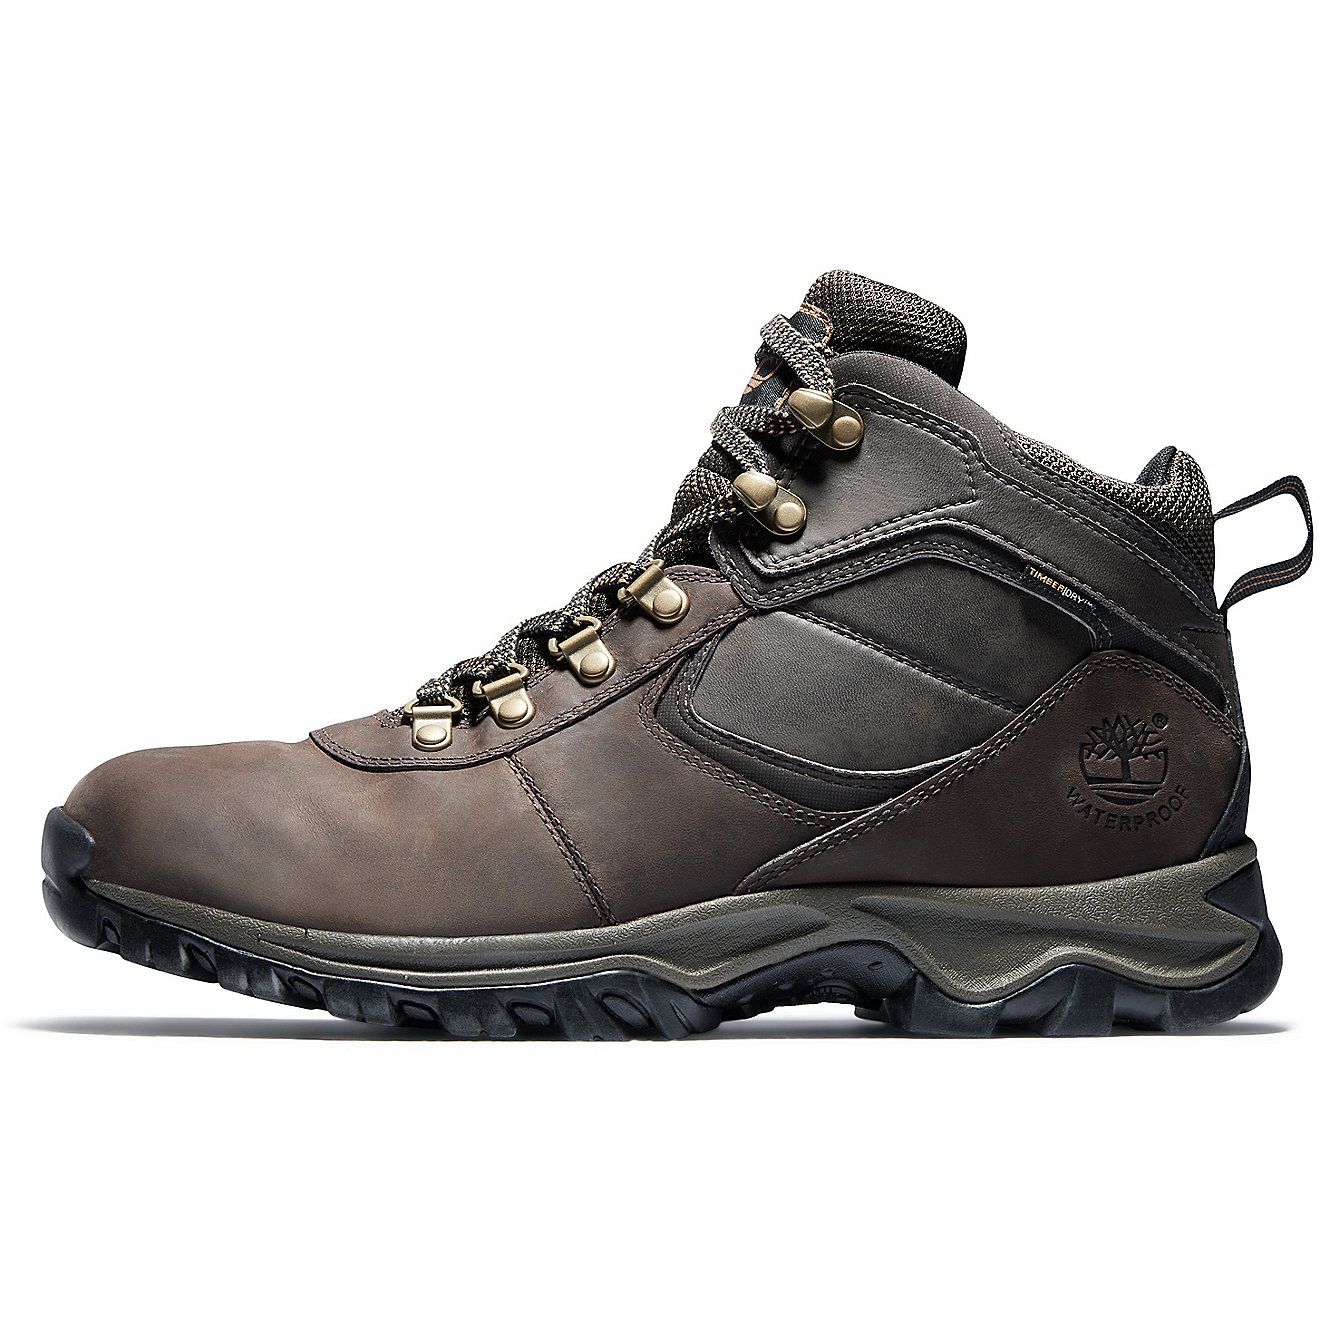 Timberland Men's Mt. Maddsen Waterproof Mid Hiking Boots                                                                         - view number 2